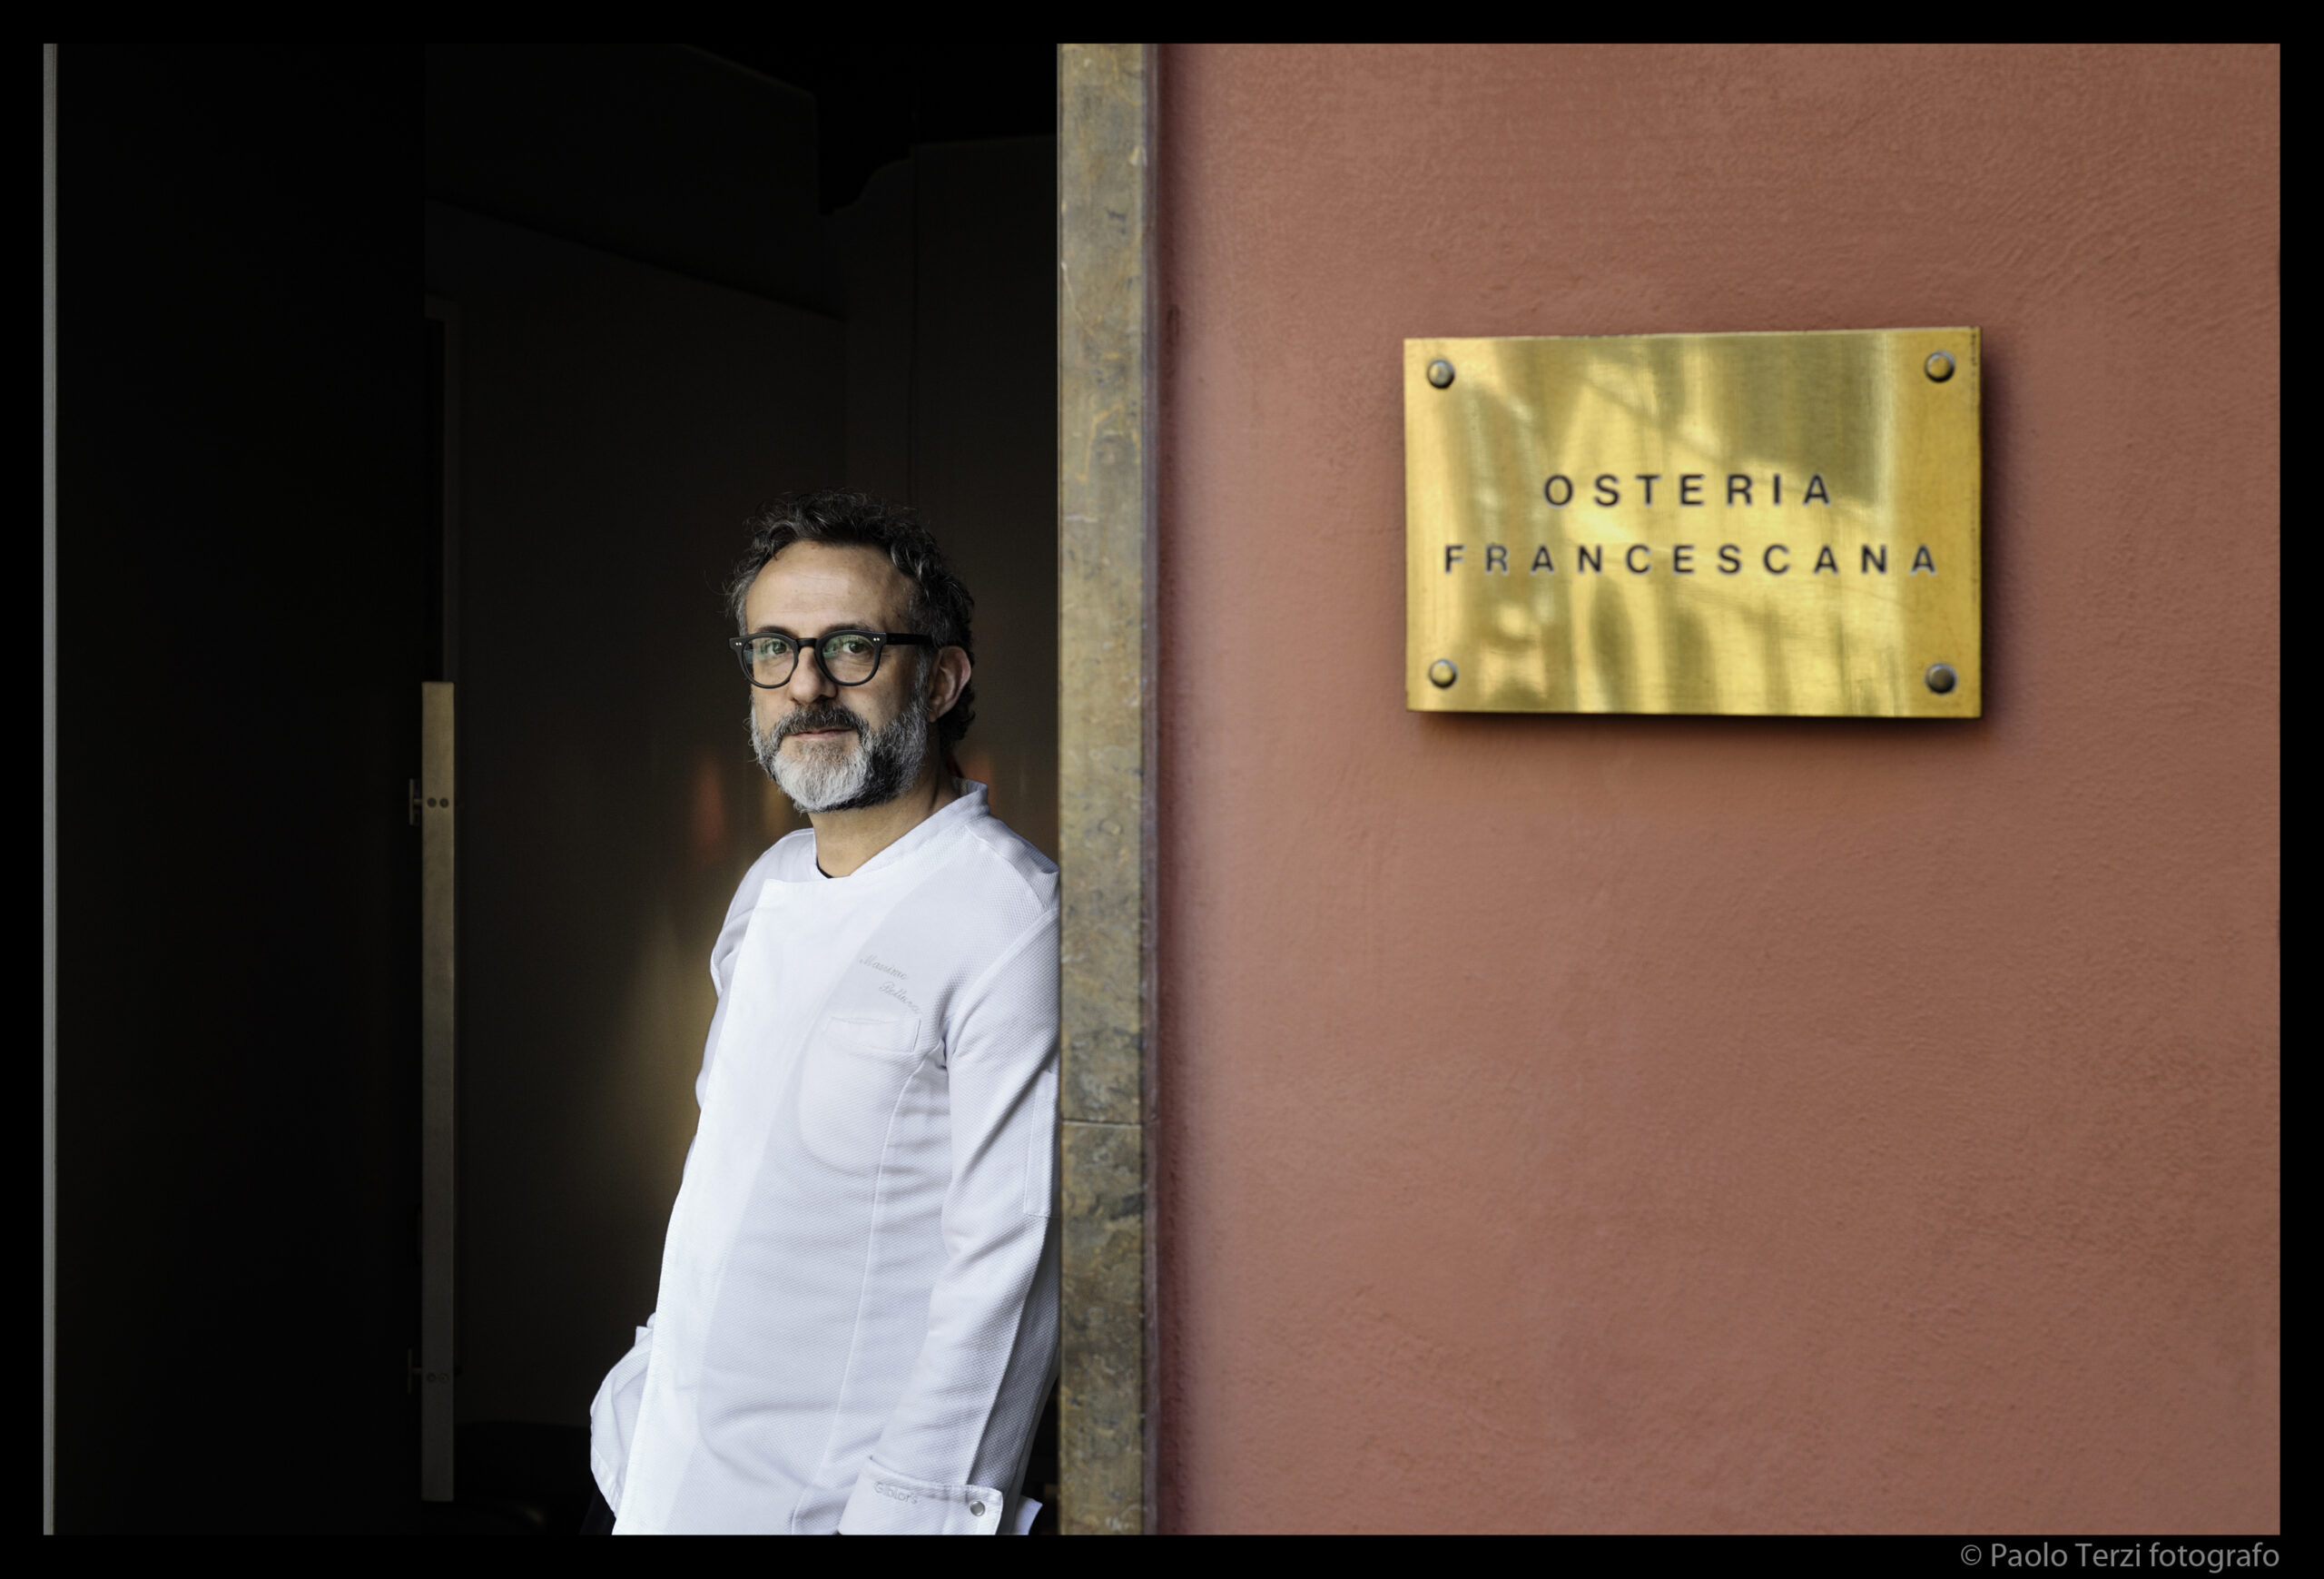 Portrait of Massimo Bottura, a chef creating equitable food systems.